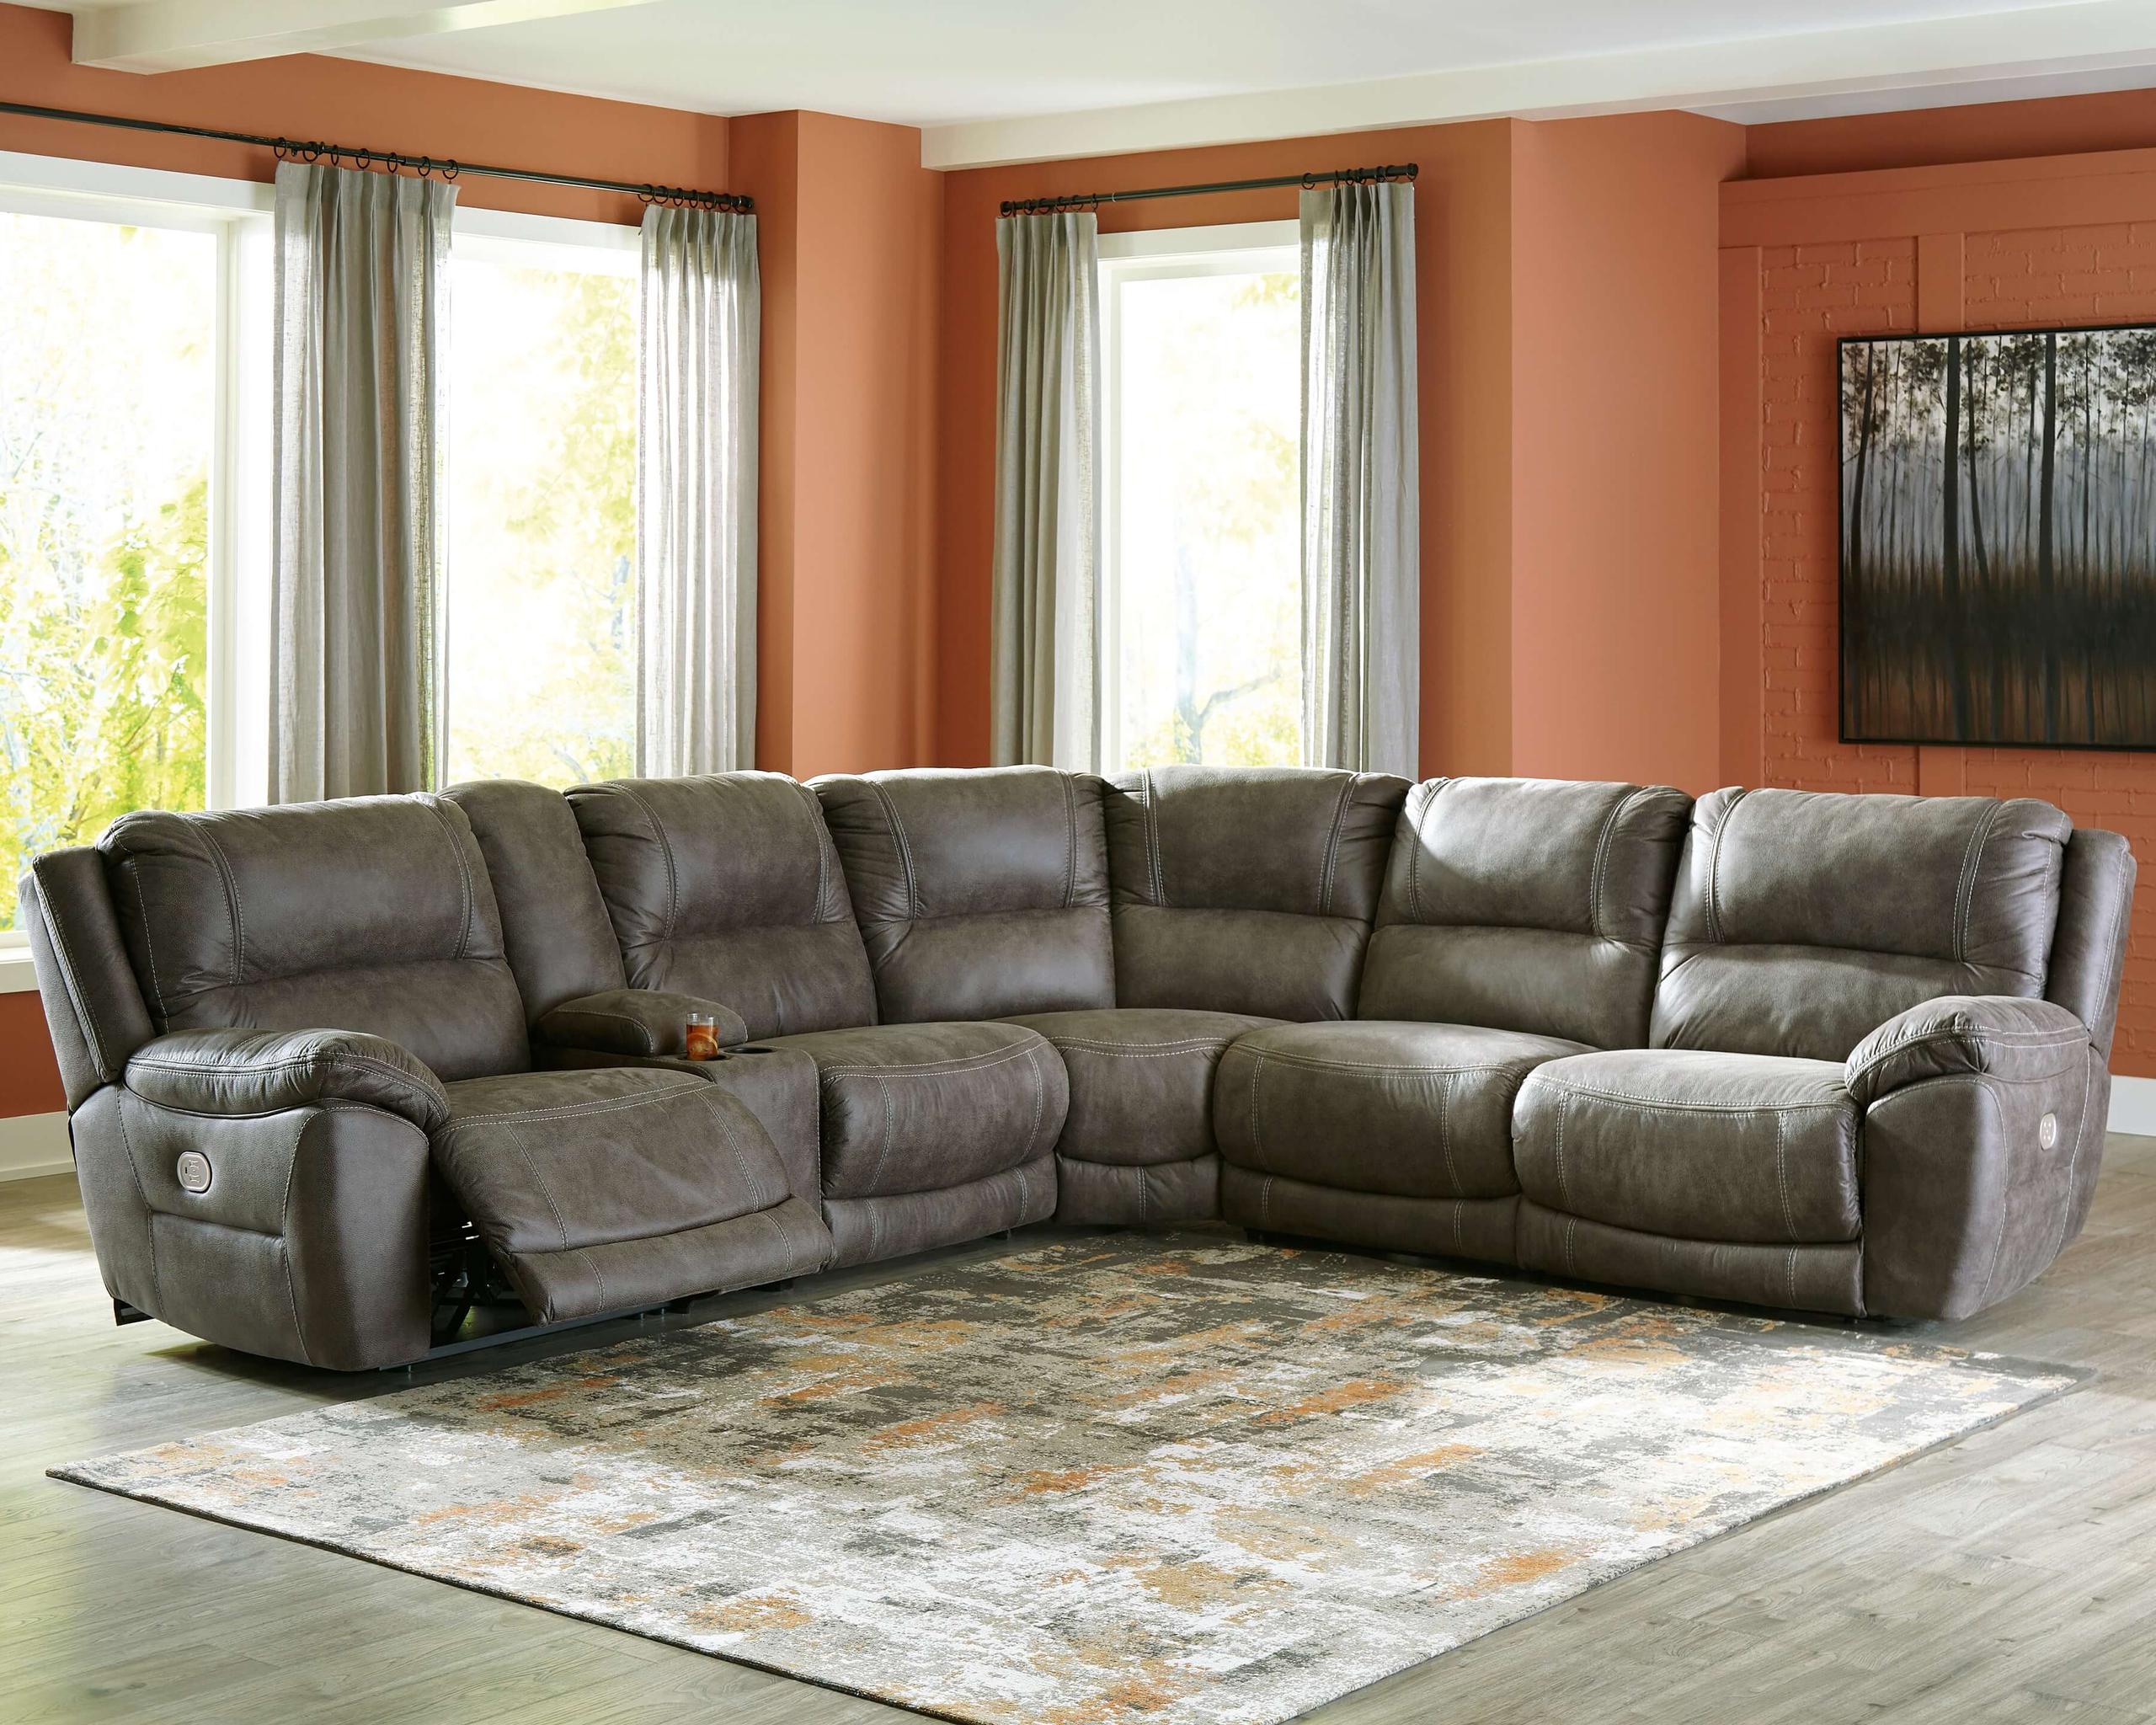 ASHLEY FURNITURE 51403S6 Cranedall 6-piece Power Reclining Sectional